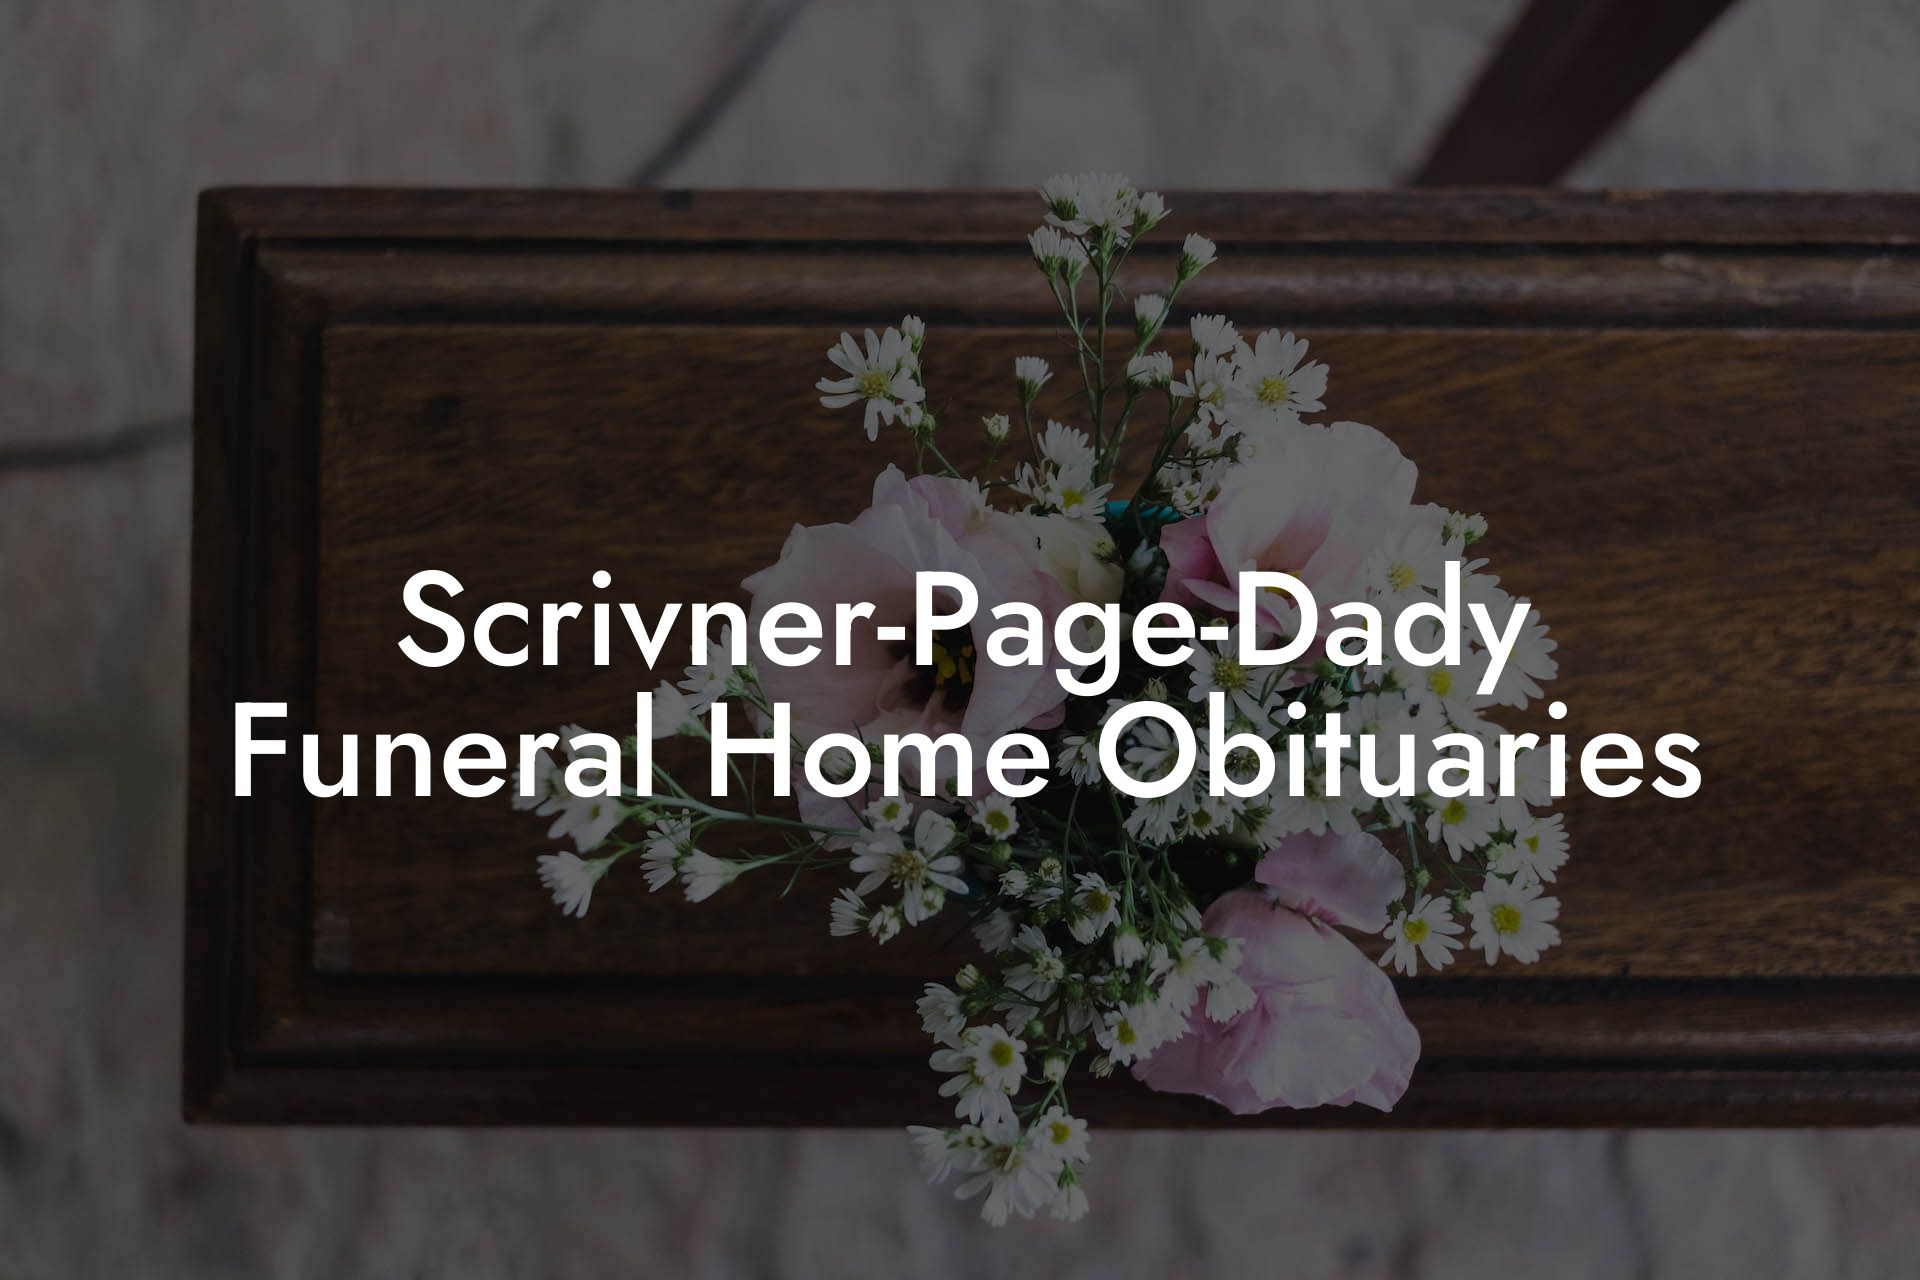 Scrivner-Page-Dady Funeral Home Obituaries